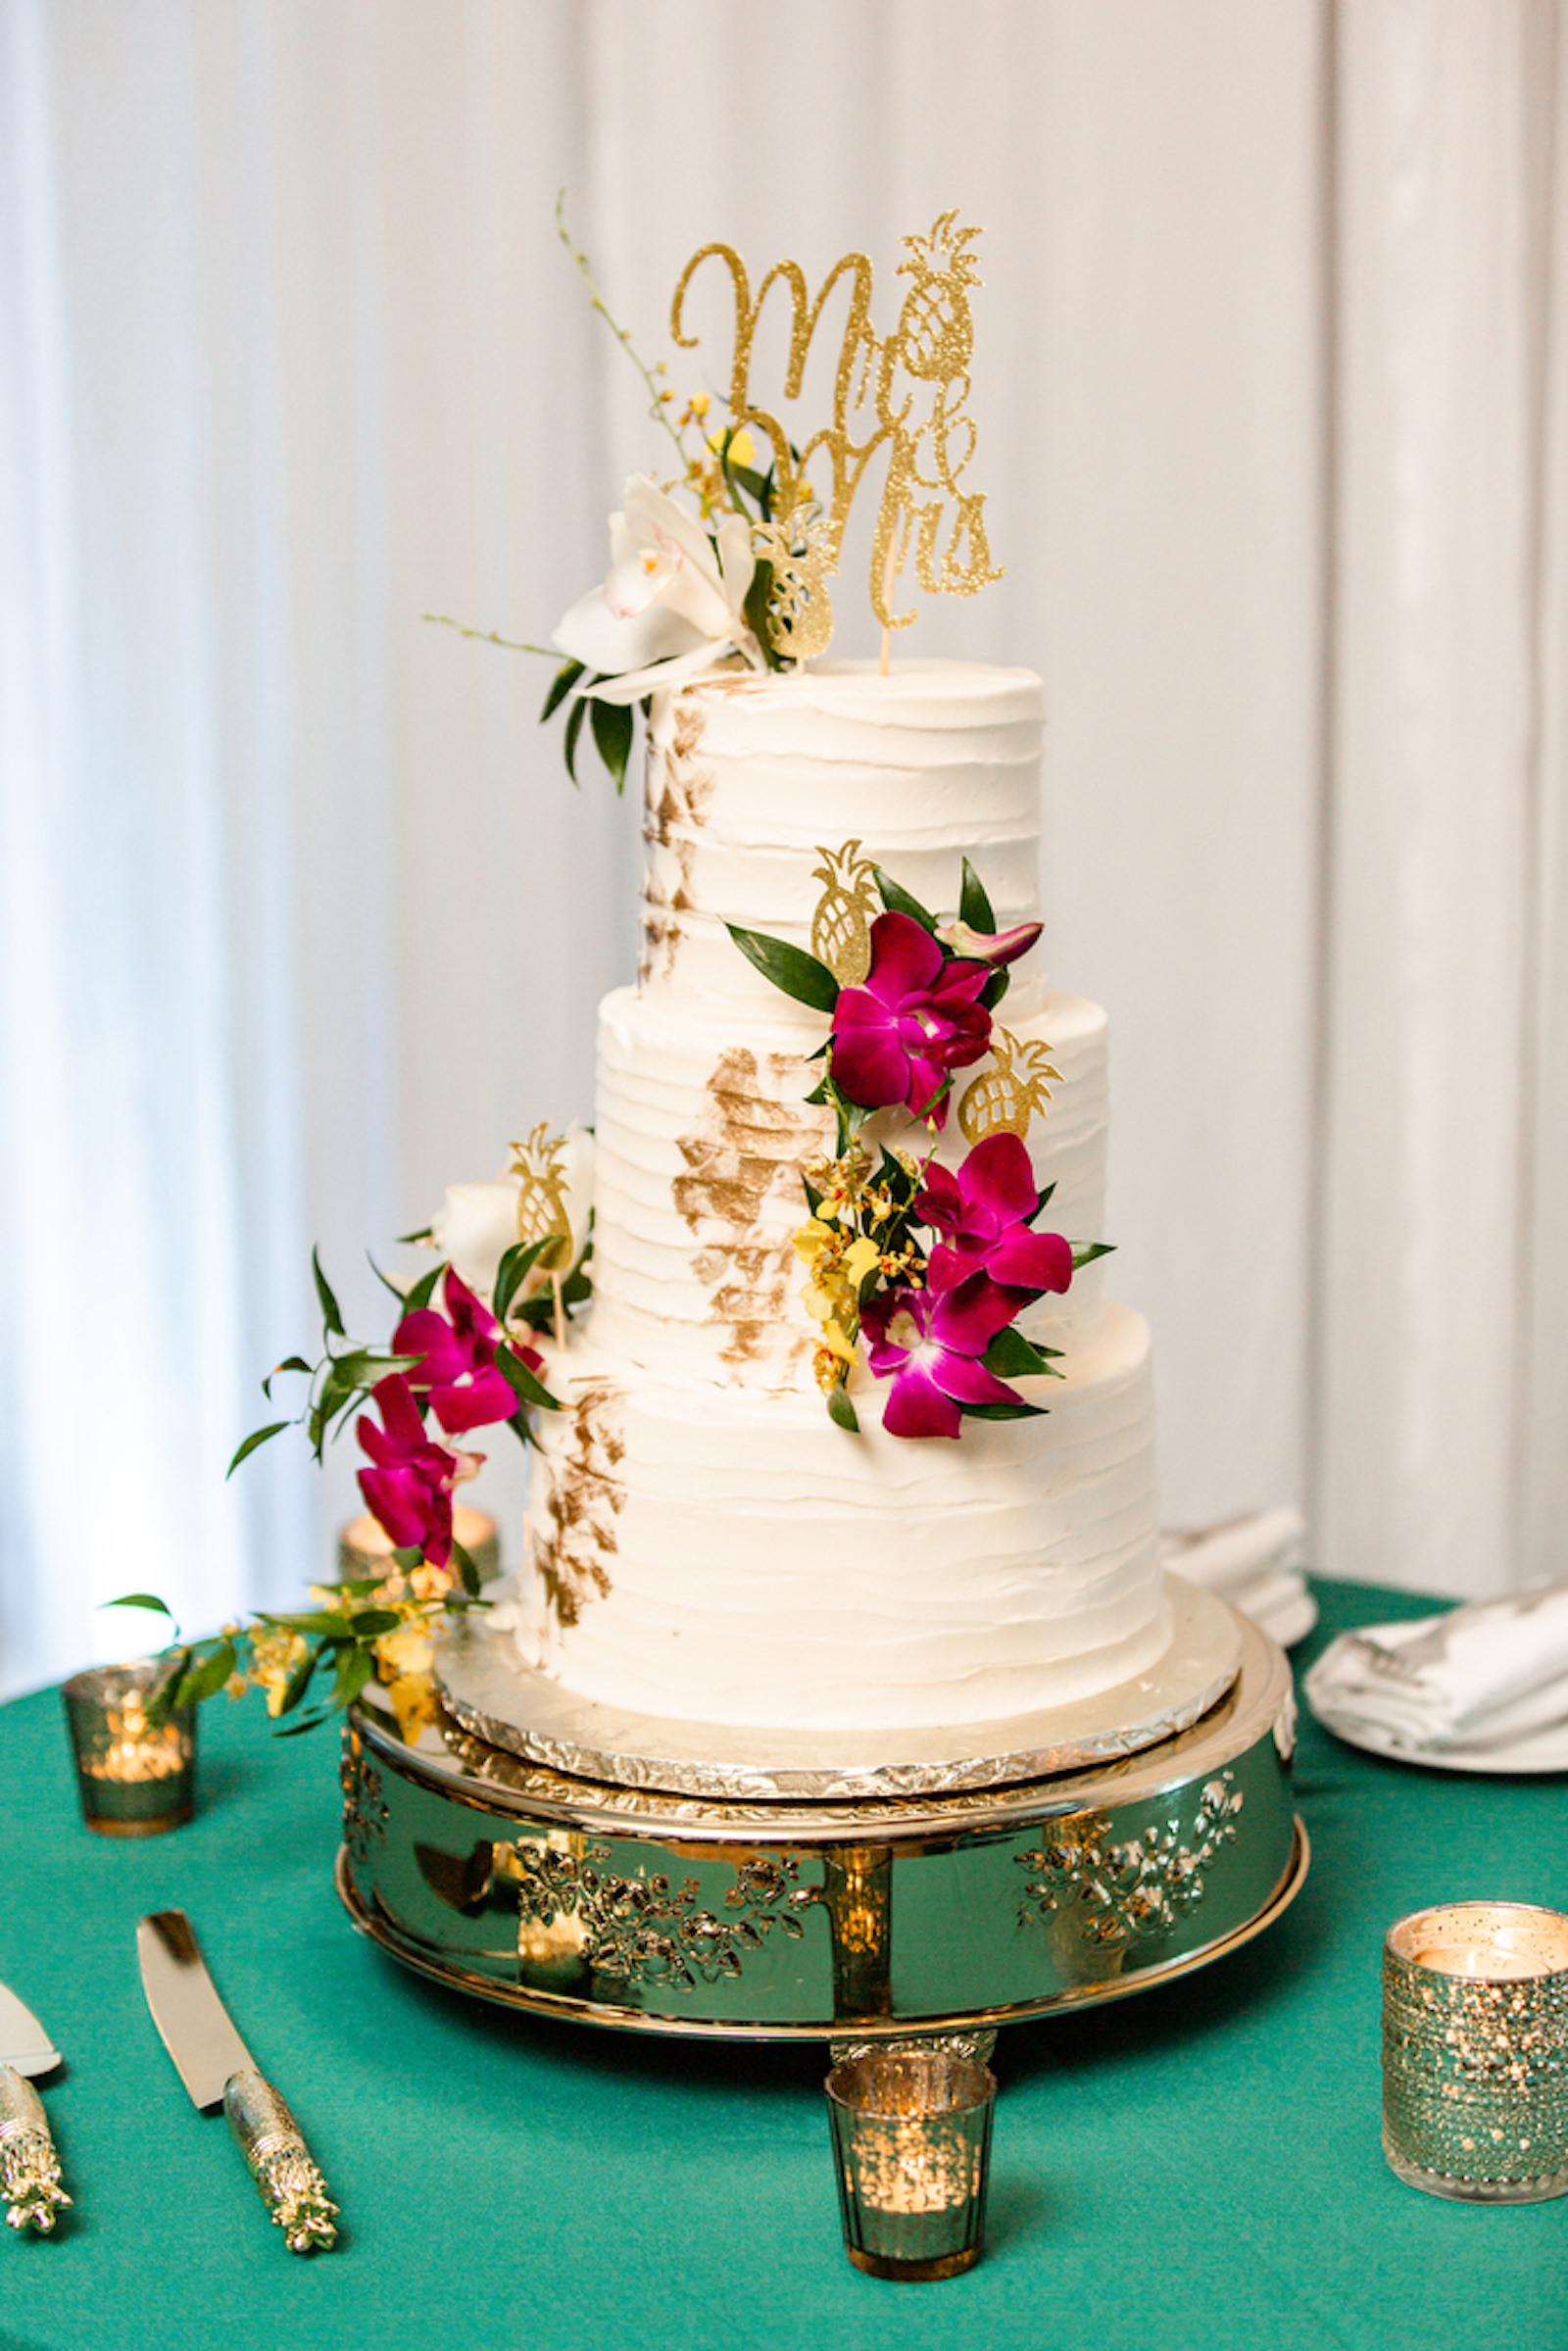 Tropical Three Tier Elegant White Wedding Cake with Purple Orchids, White Flower, Gold Cake Topper